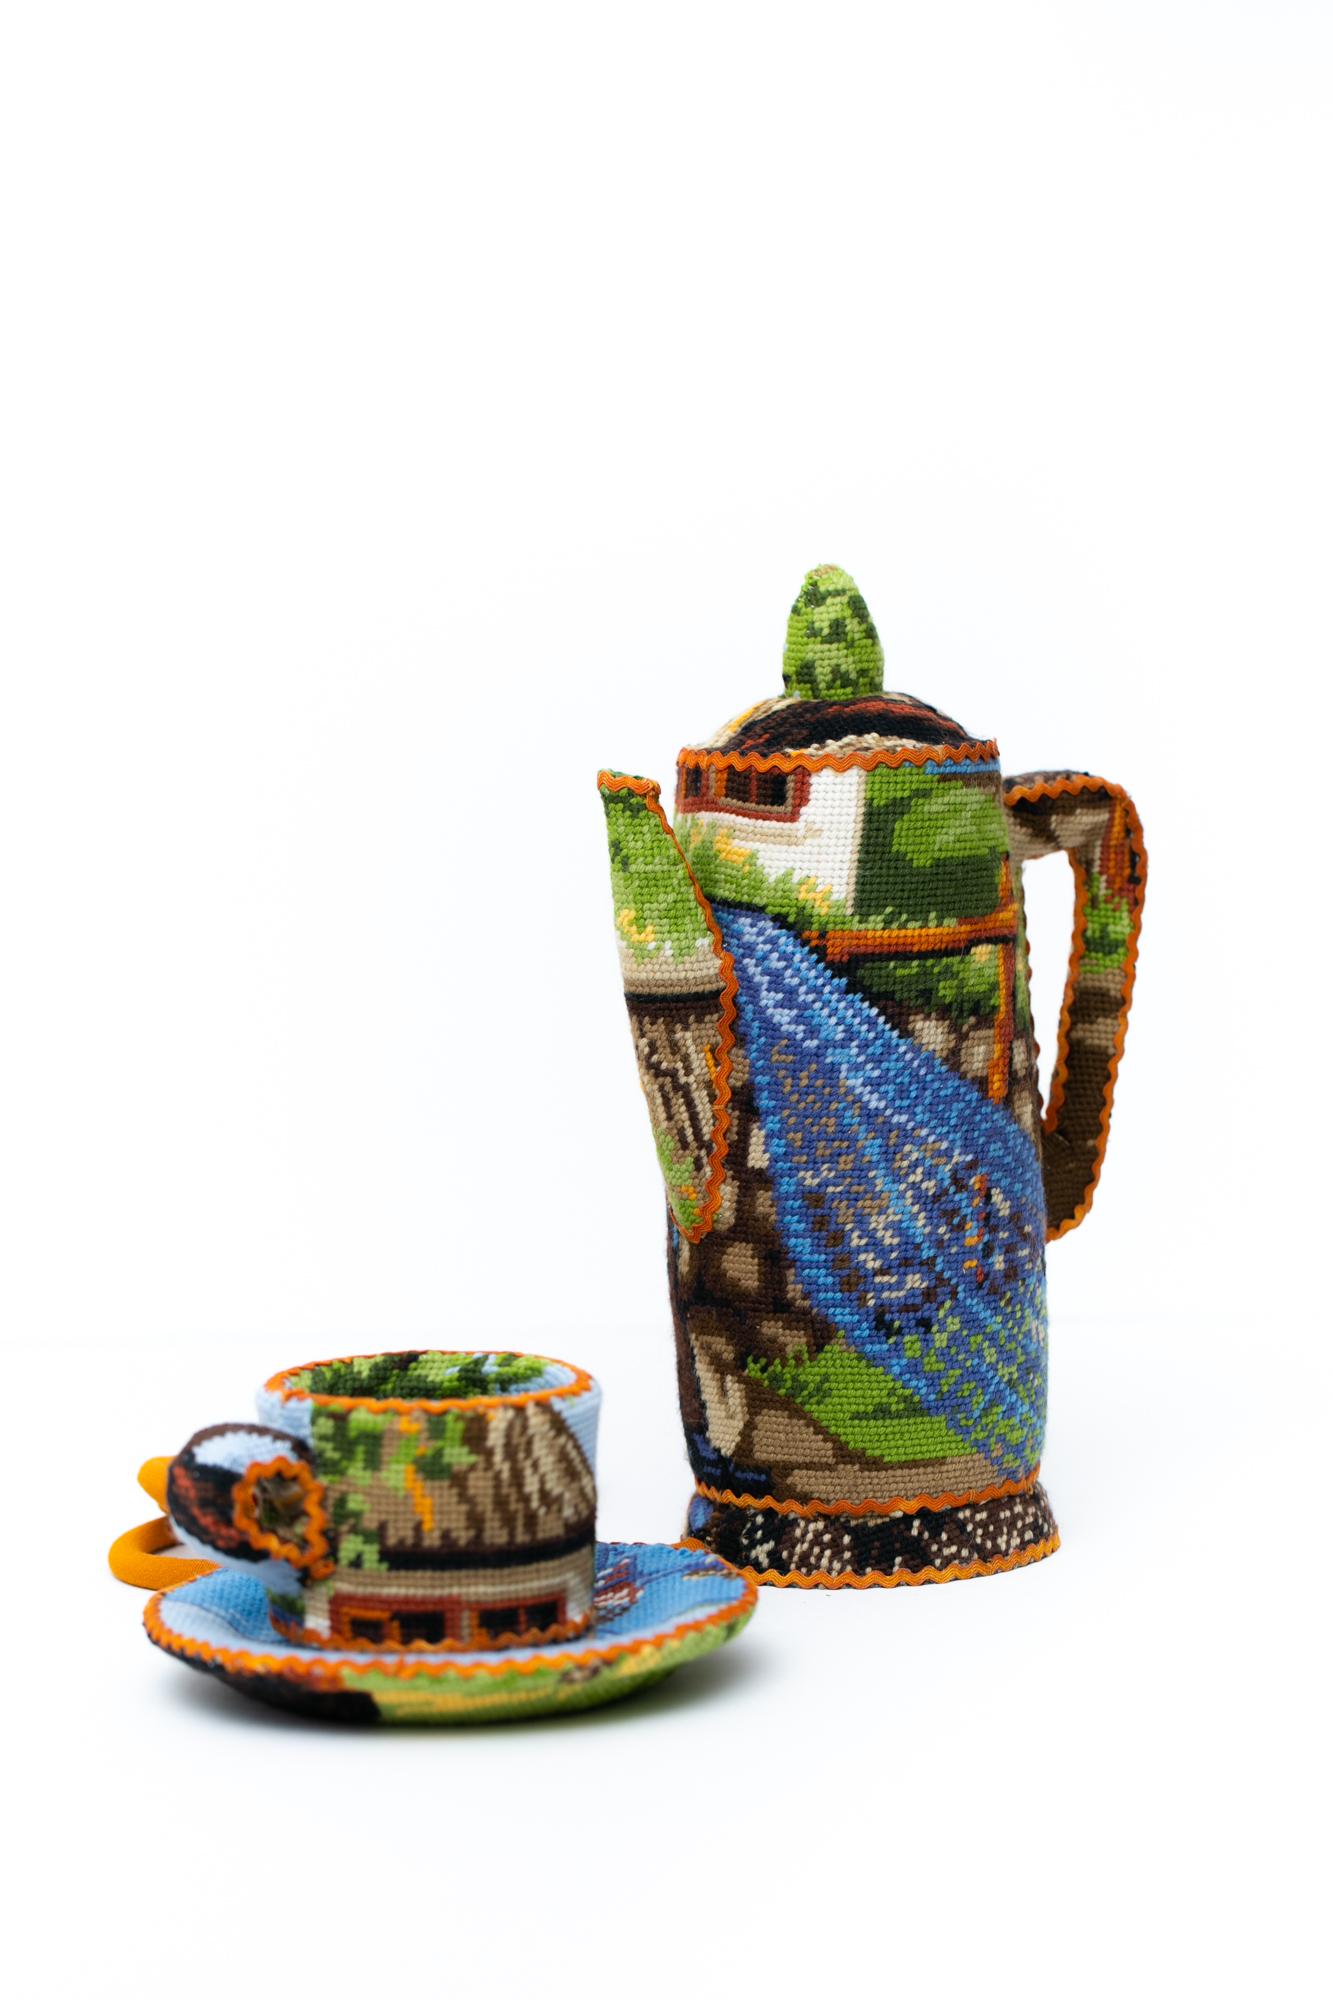 Brewer and Cup - Sculpture by Ulla-Stina Wikander